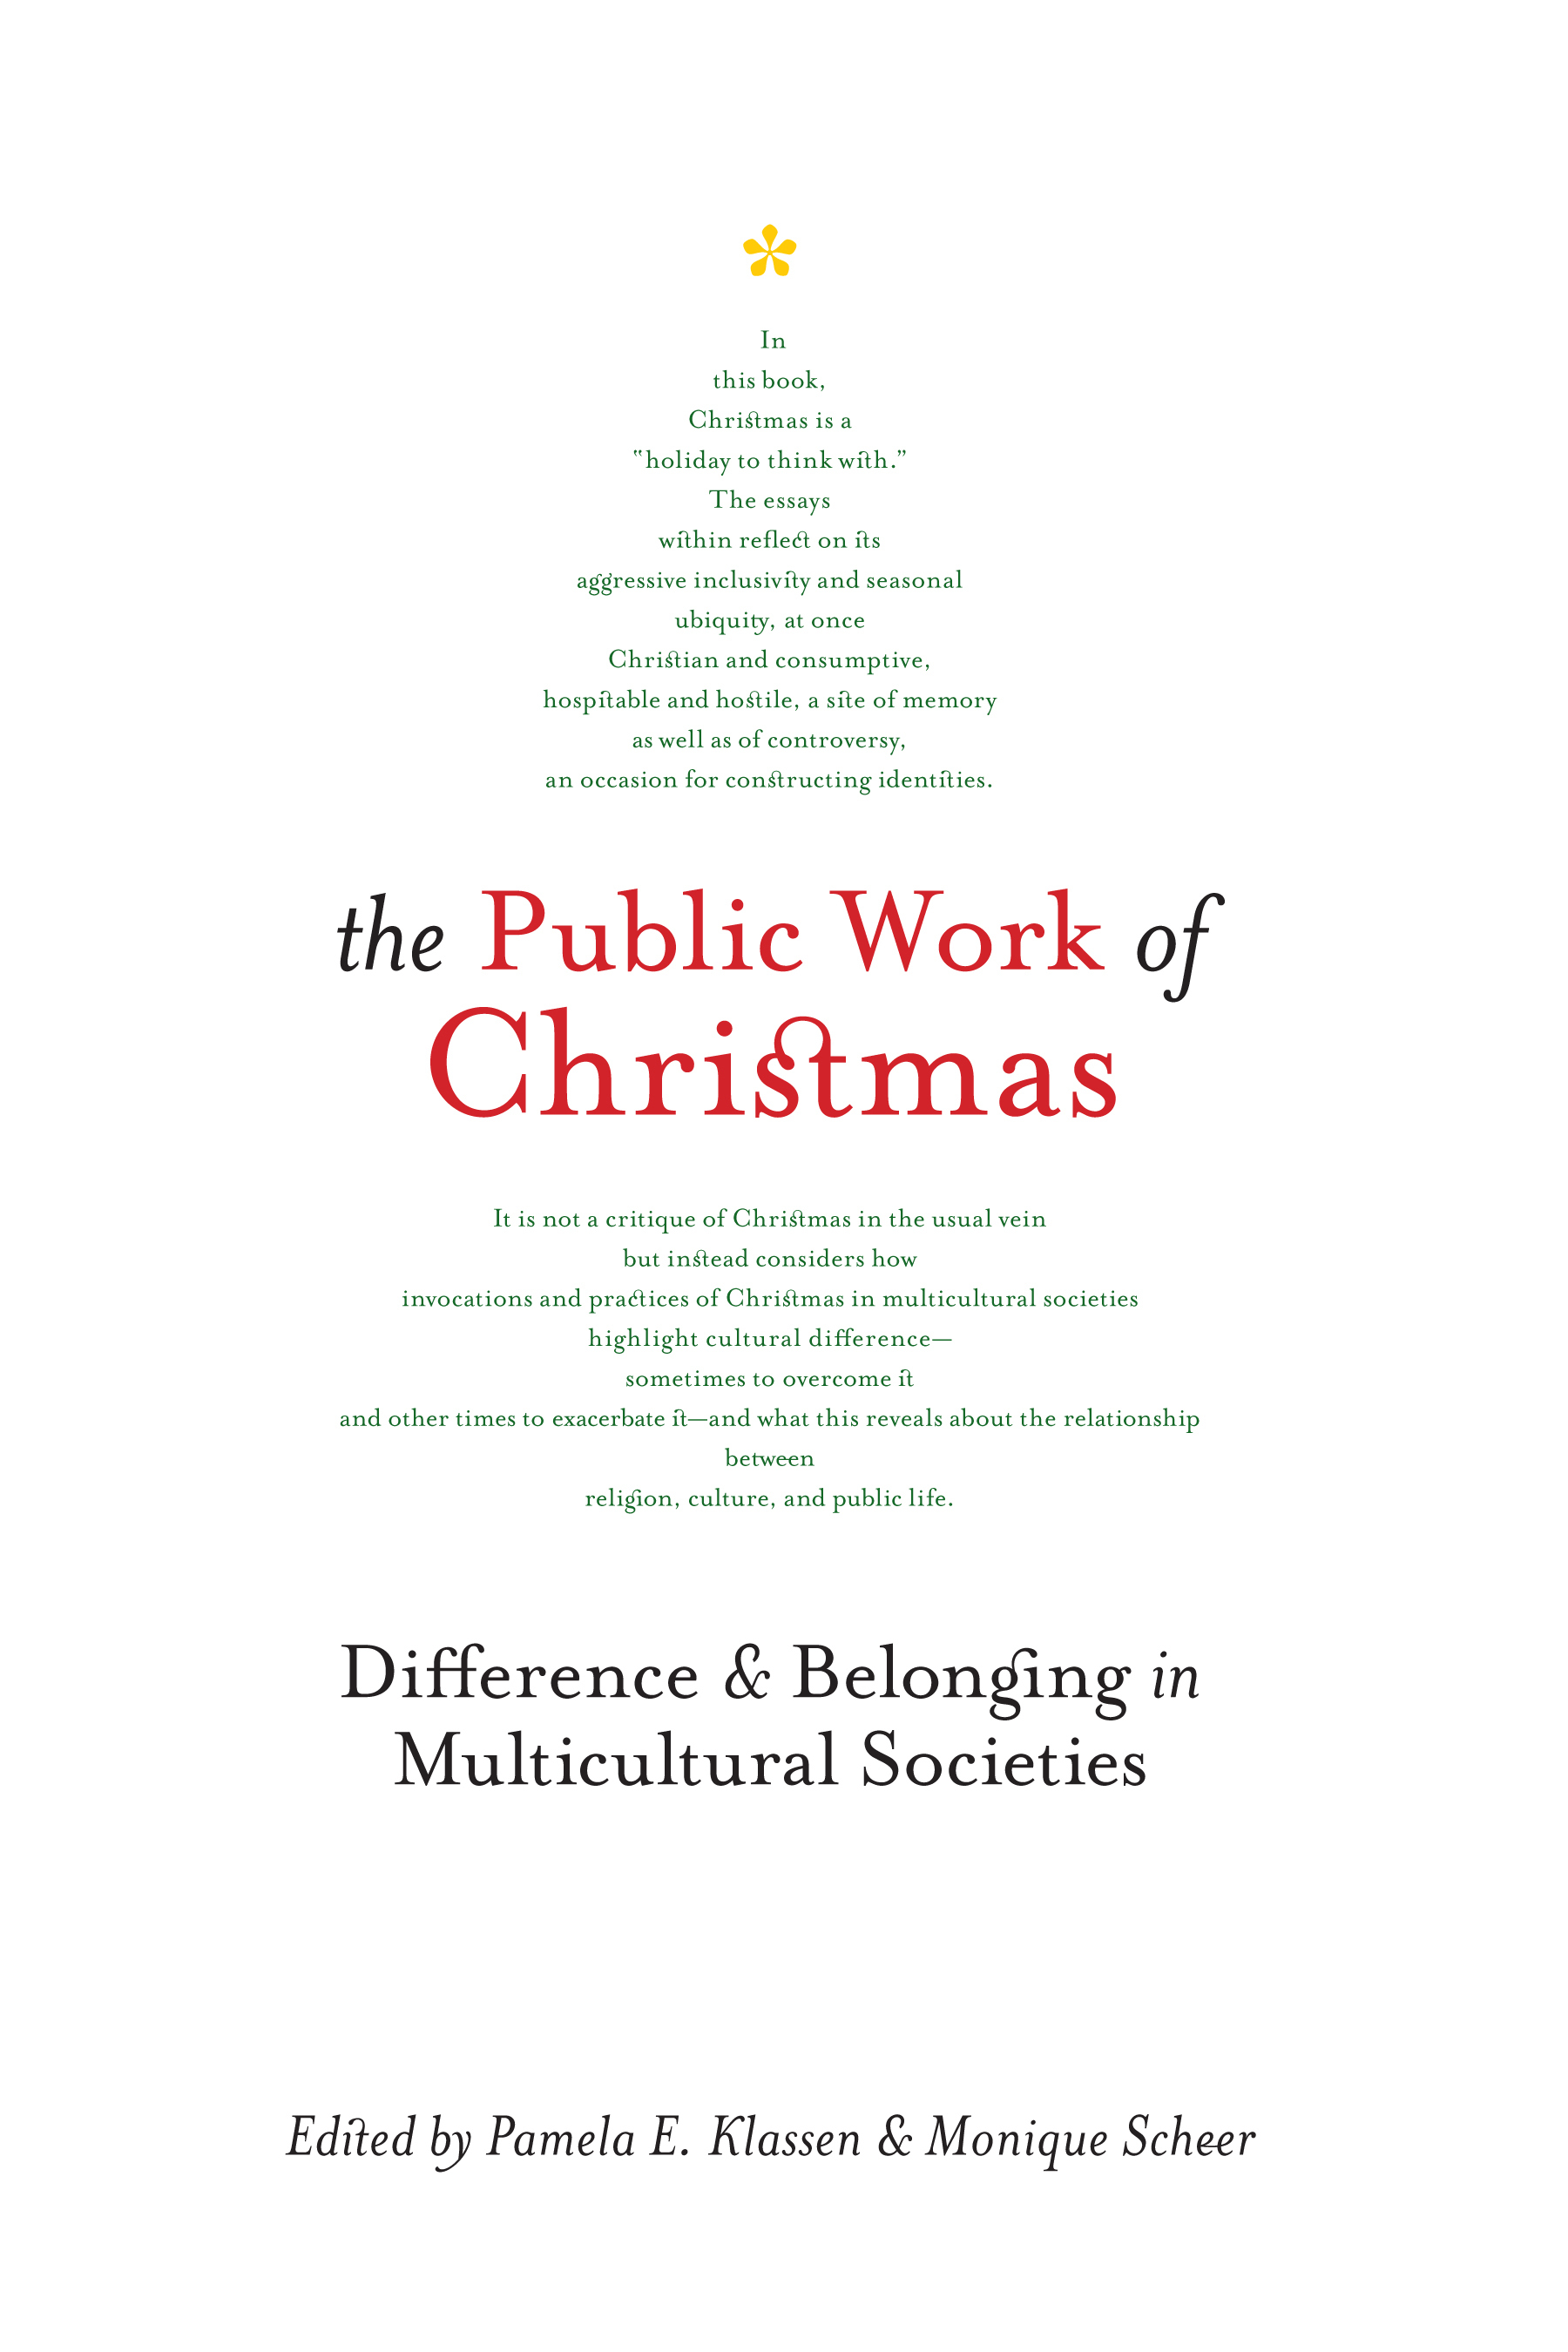 The Public Work of Christmas